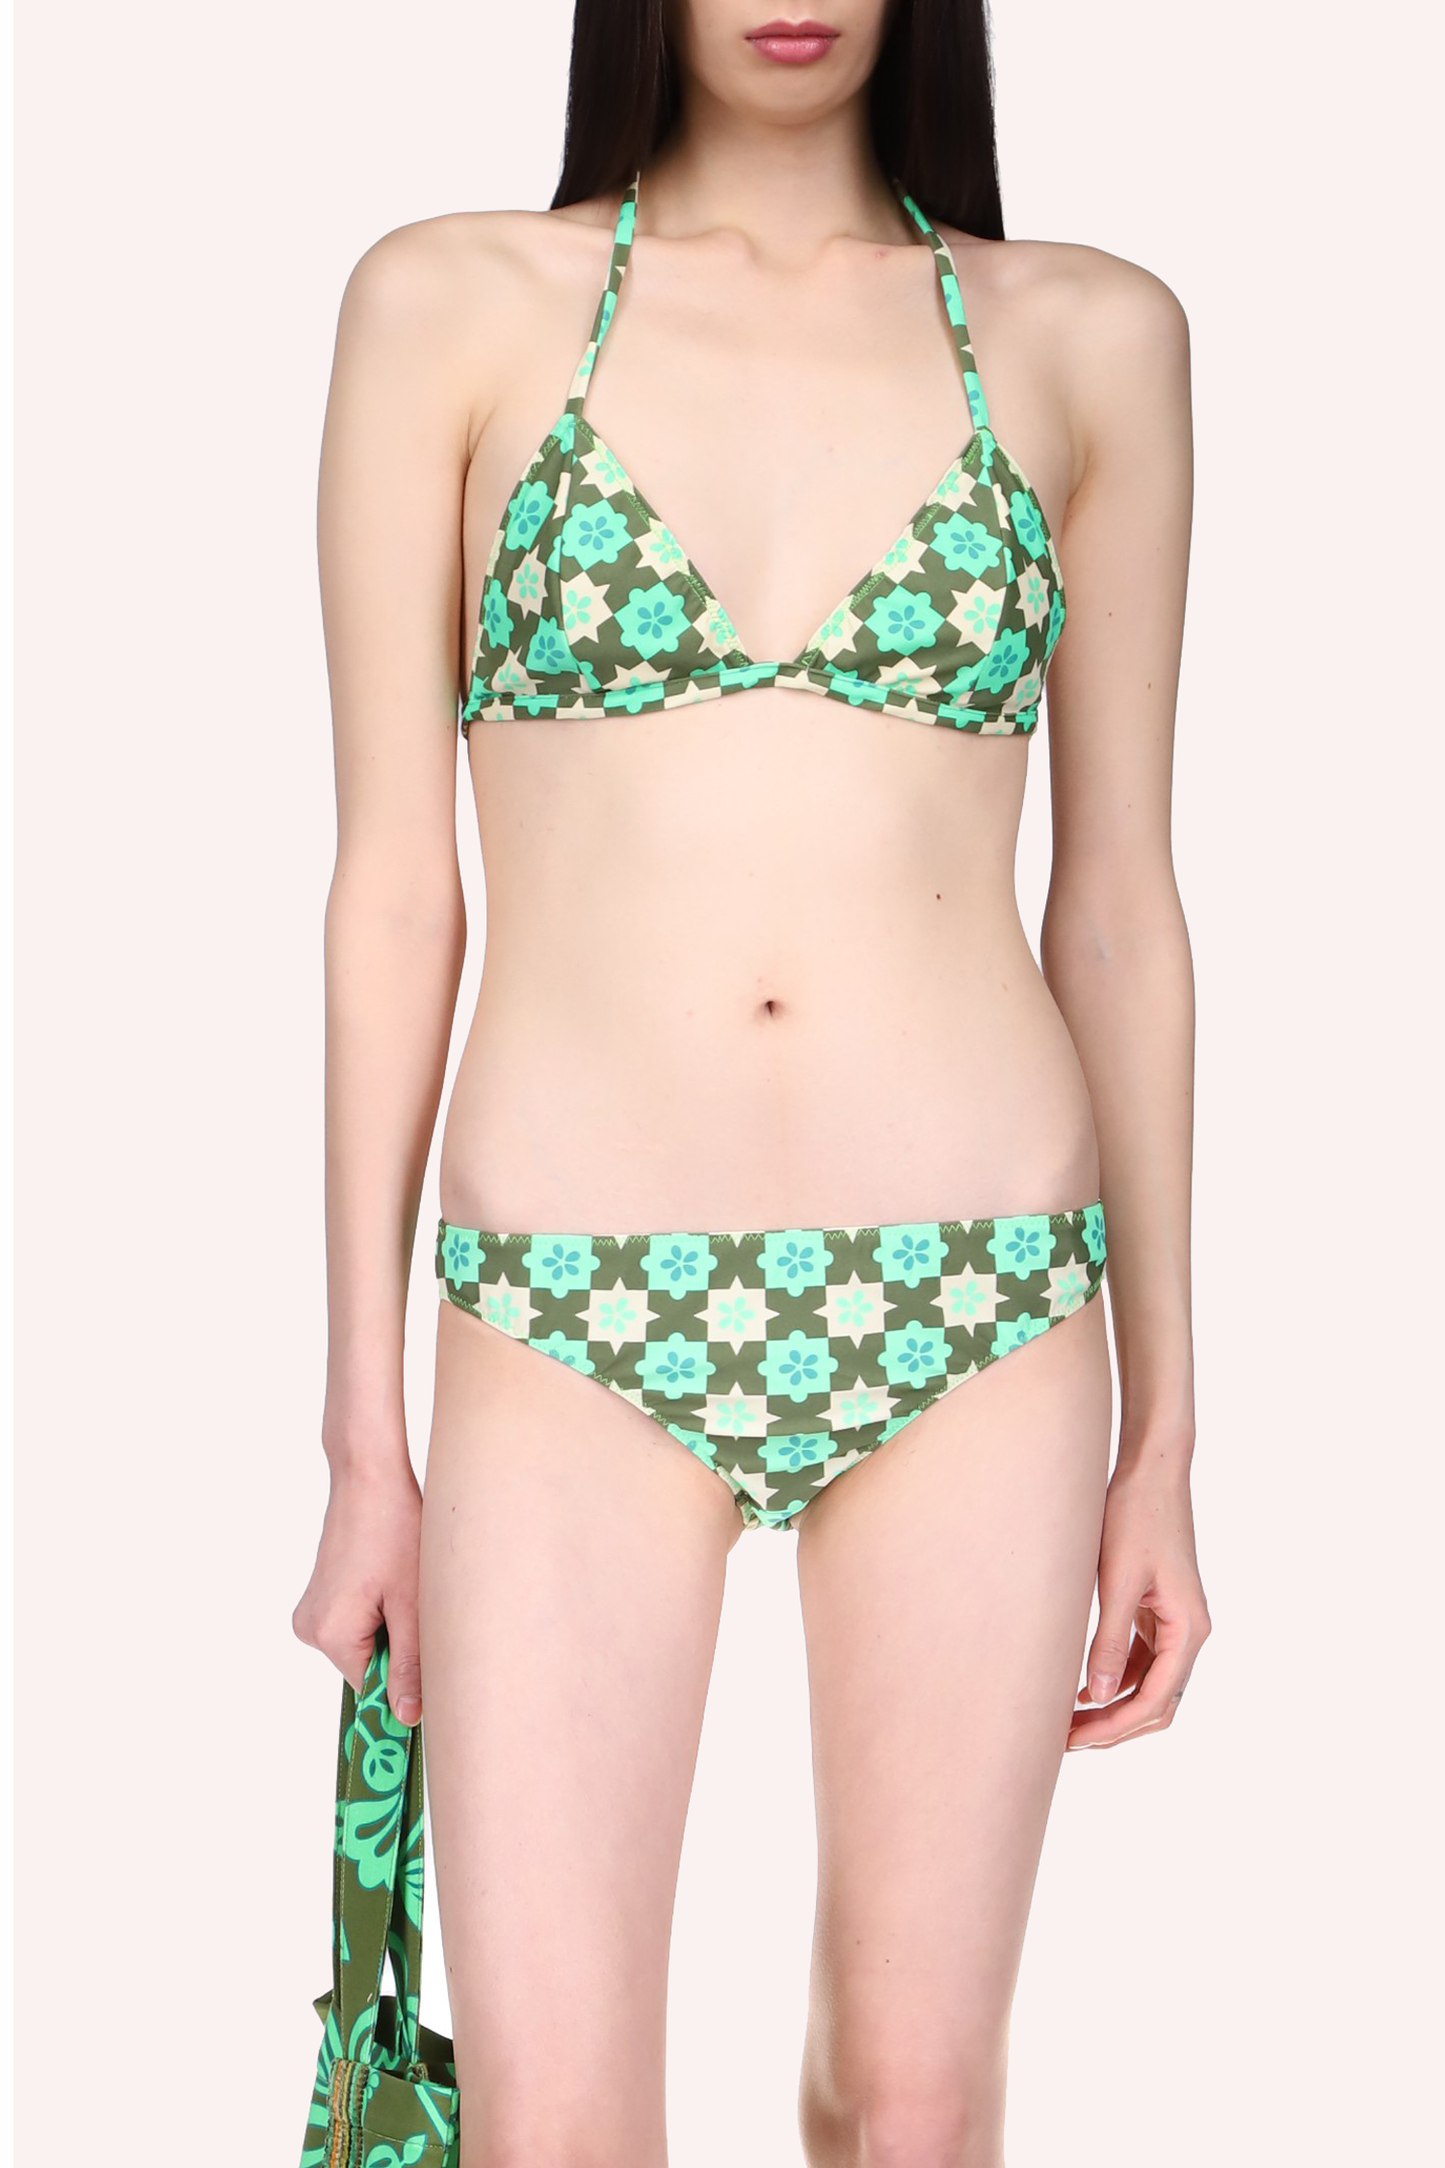 Utopian Gingham Triangle Bikini Set features a green light and dark and white star-shaped pattern